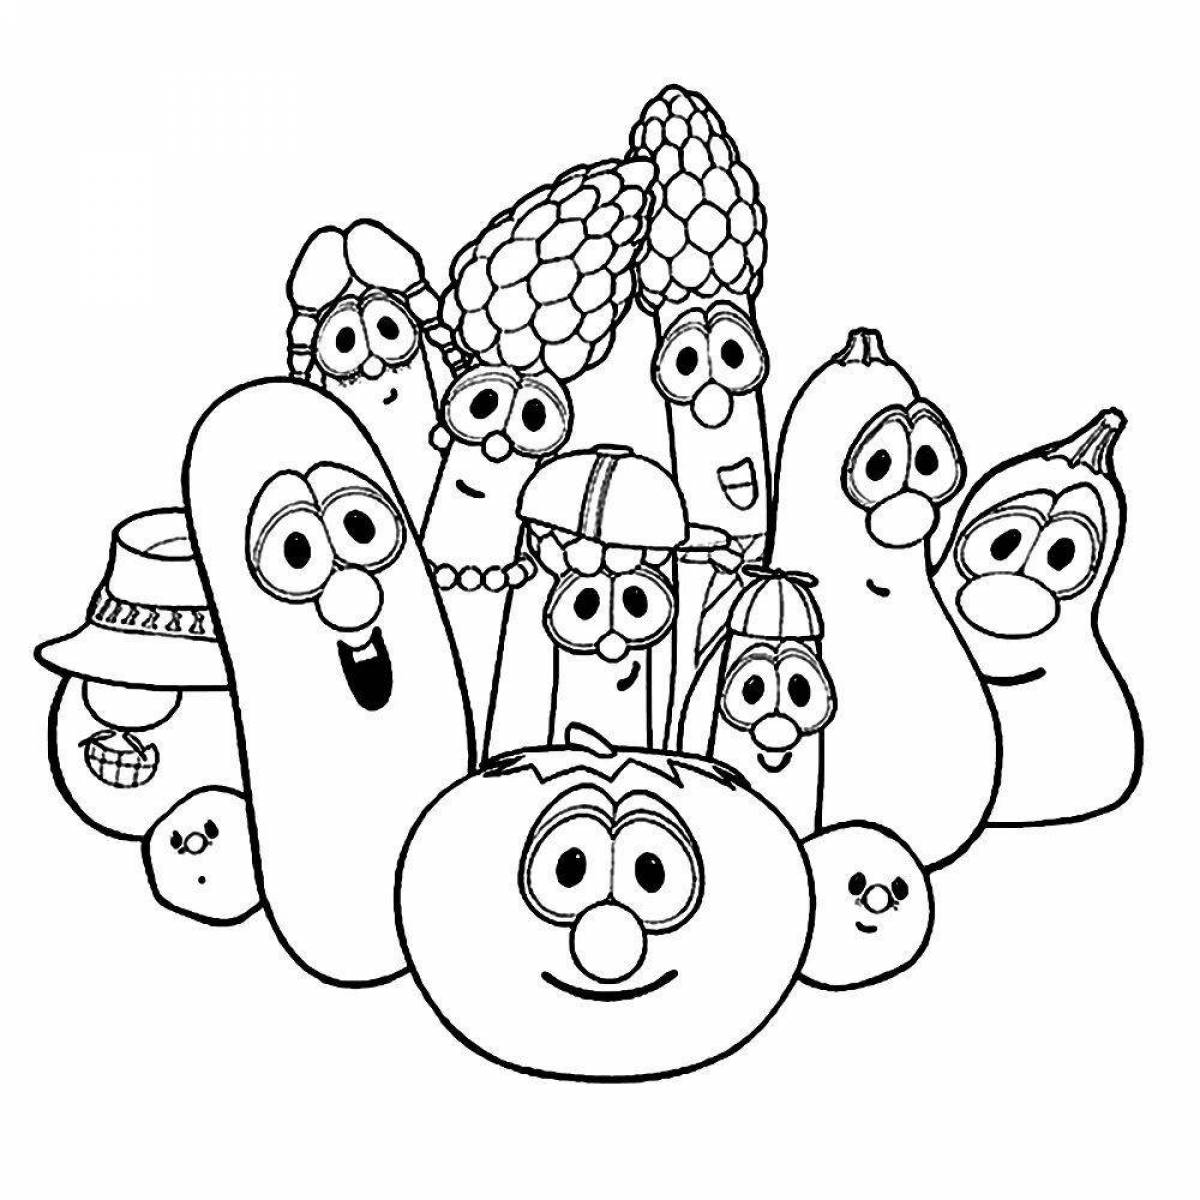 Sparkling cute fruit coloring pages